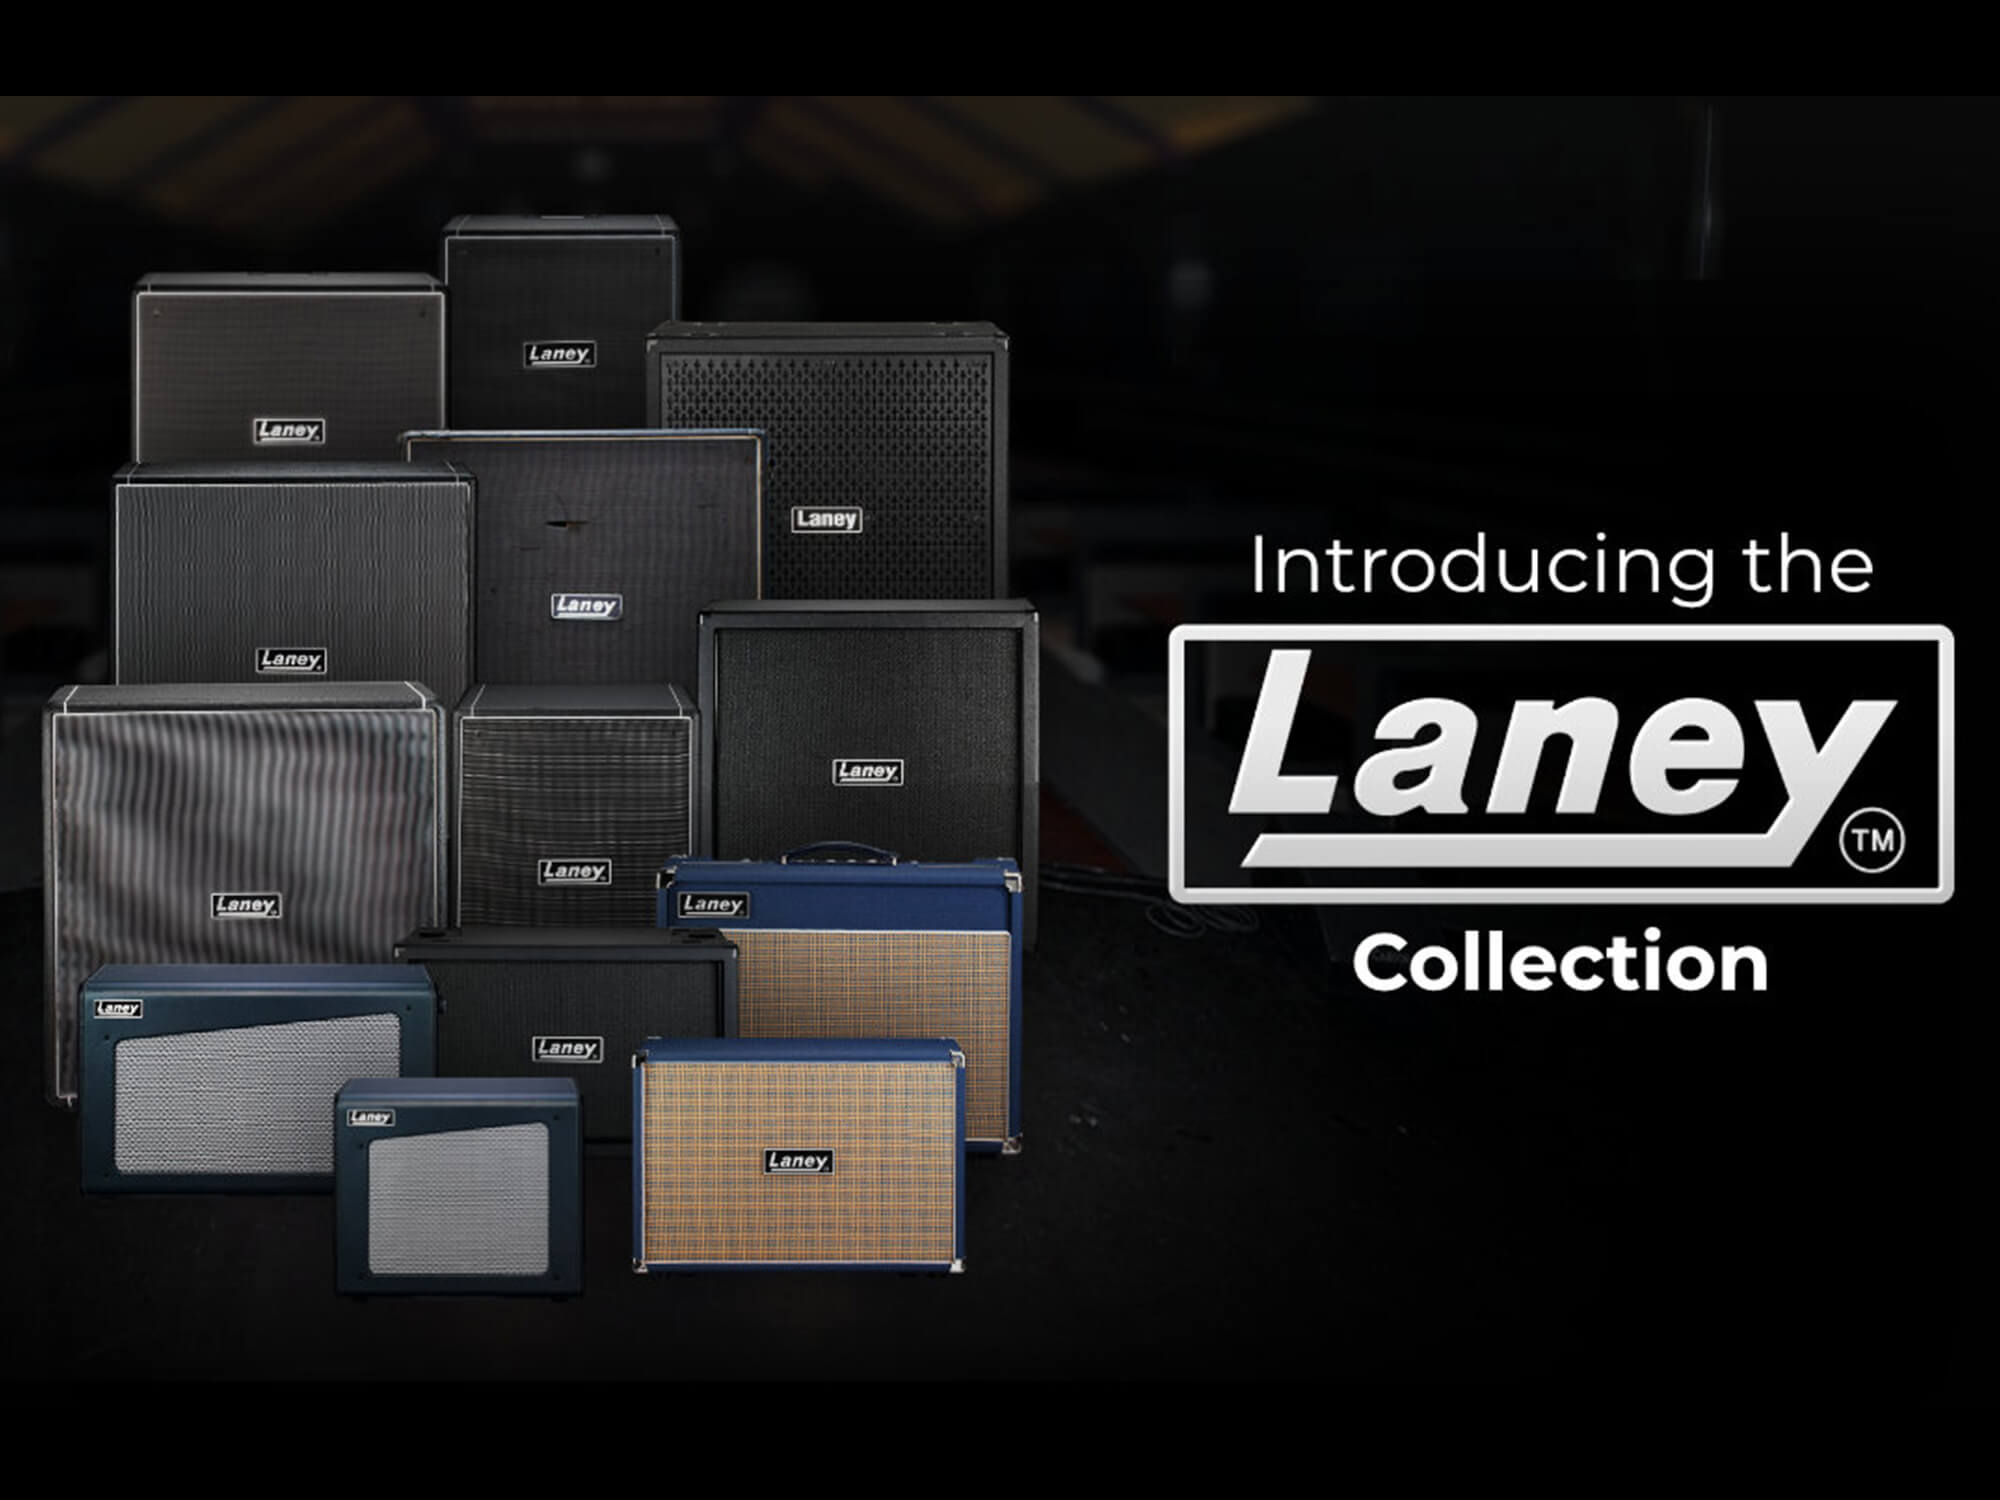 The Laney Collection